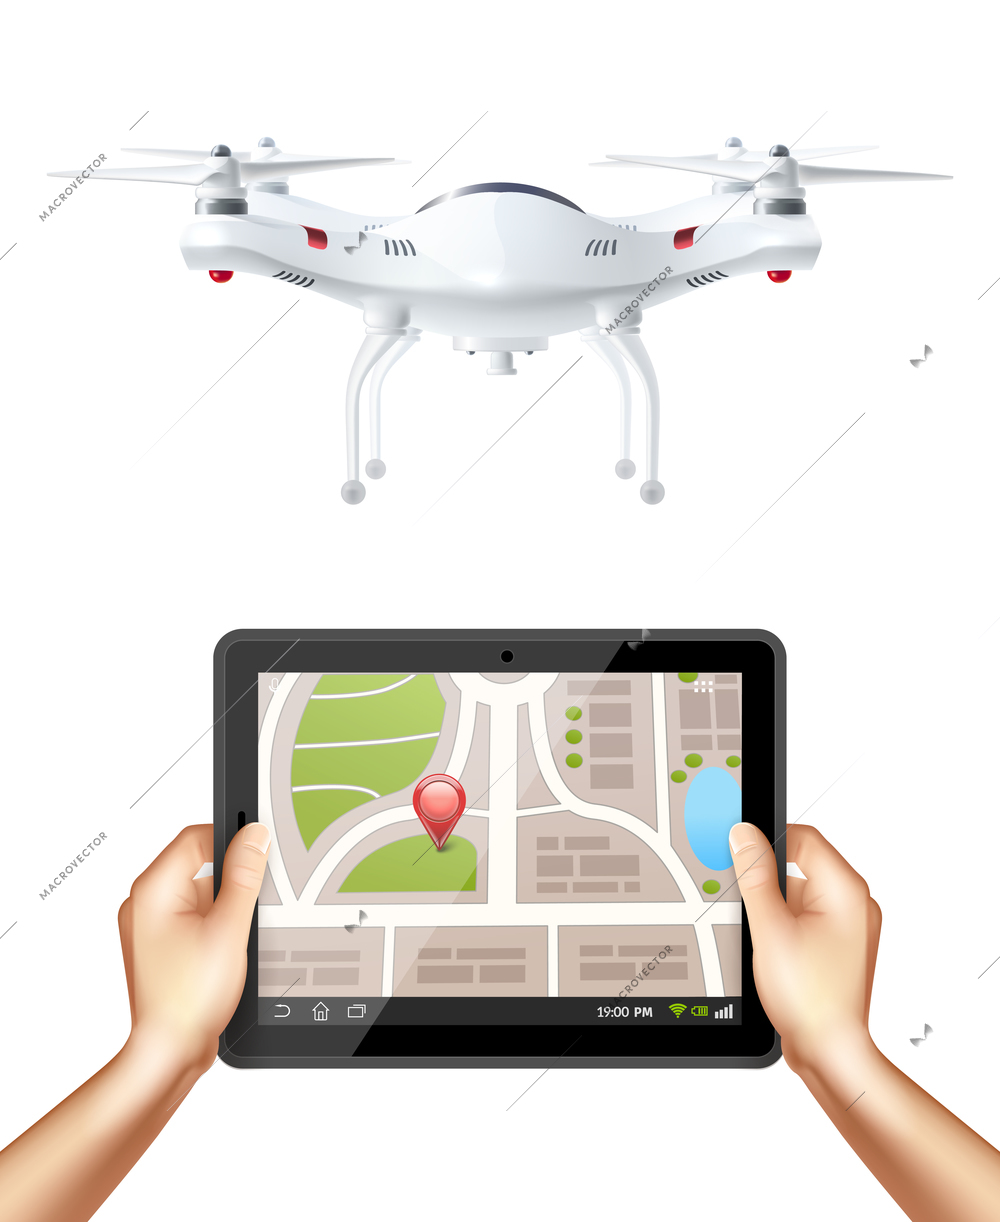 Remote controlled quadrocopter with camera and hands holding tablet with navigation app design concept in realistic style vector illustration